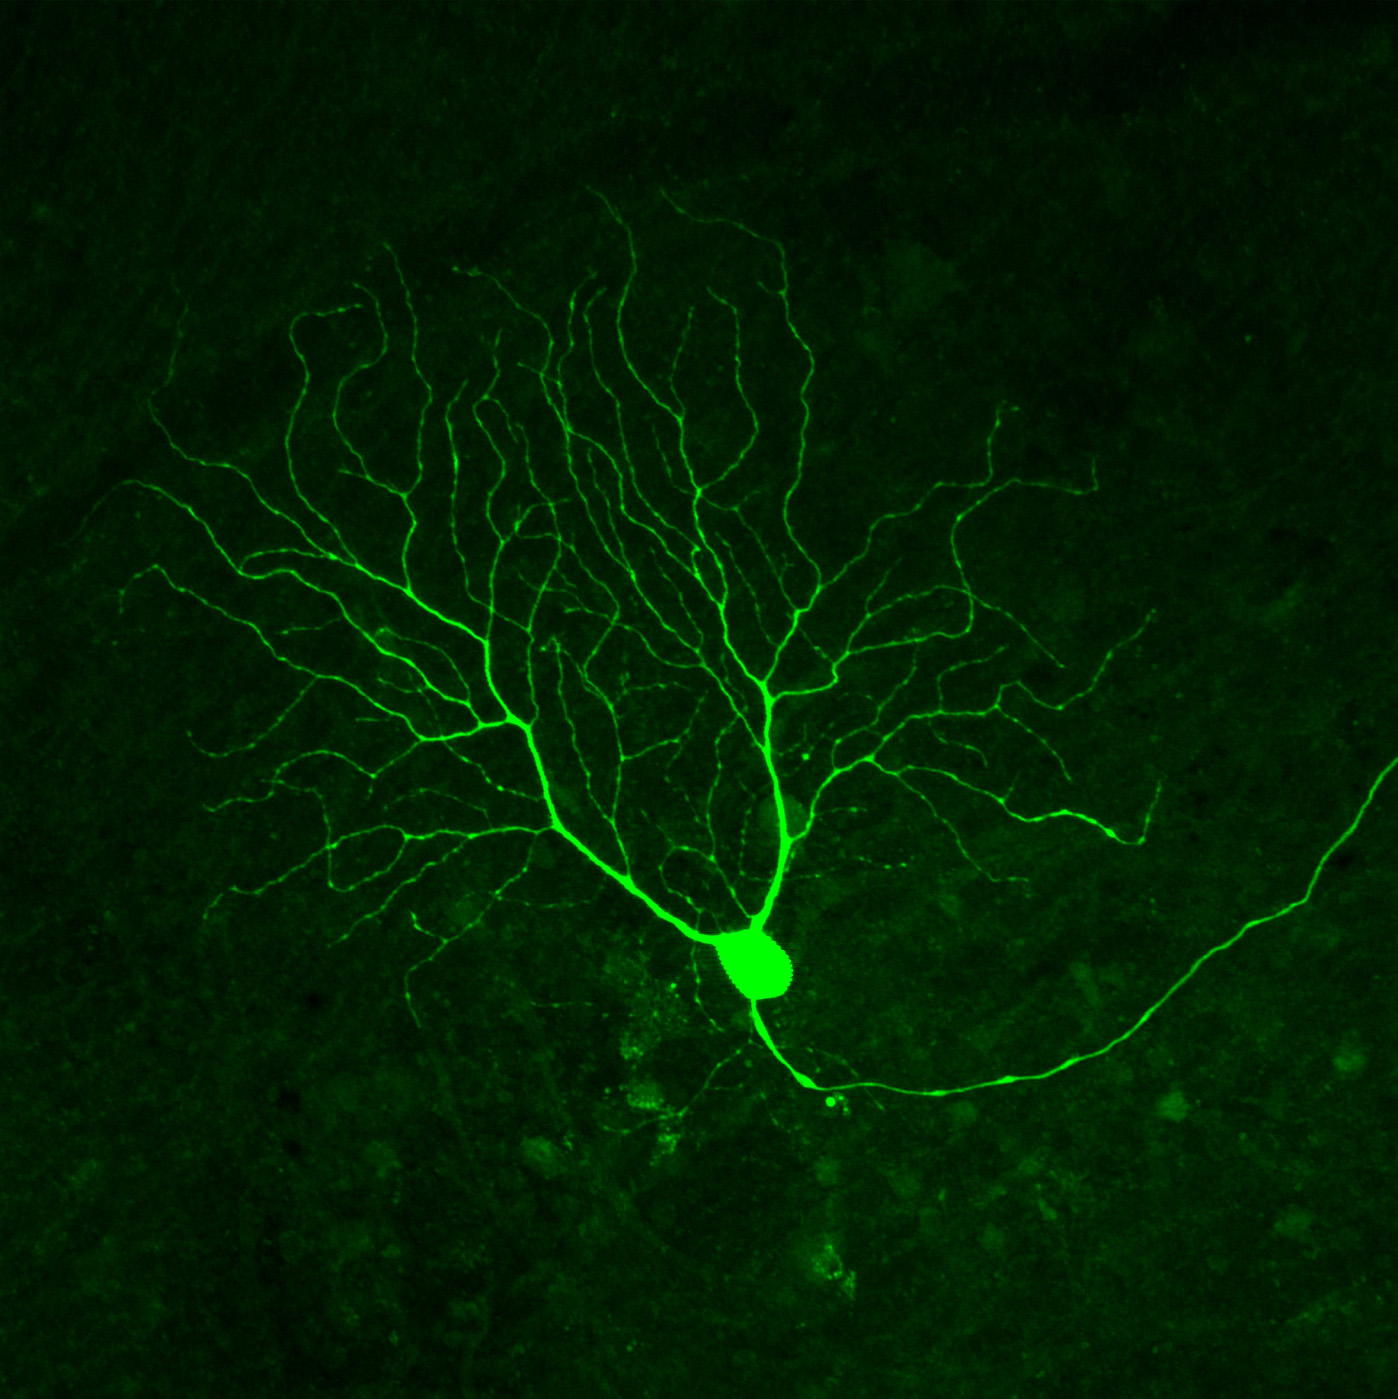 Tiny anatomical differences can dramatically change a neuron's signalling behavior